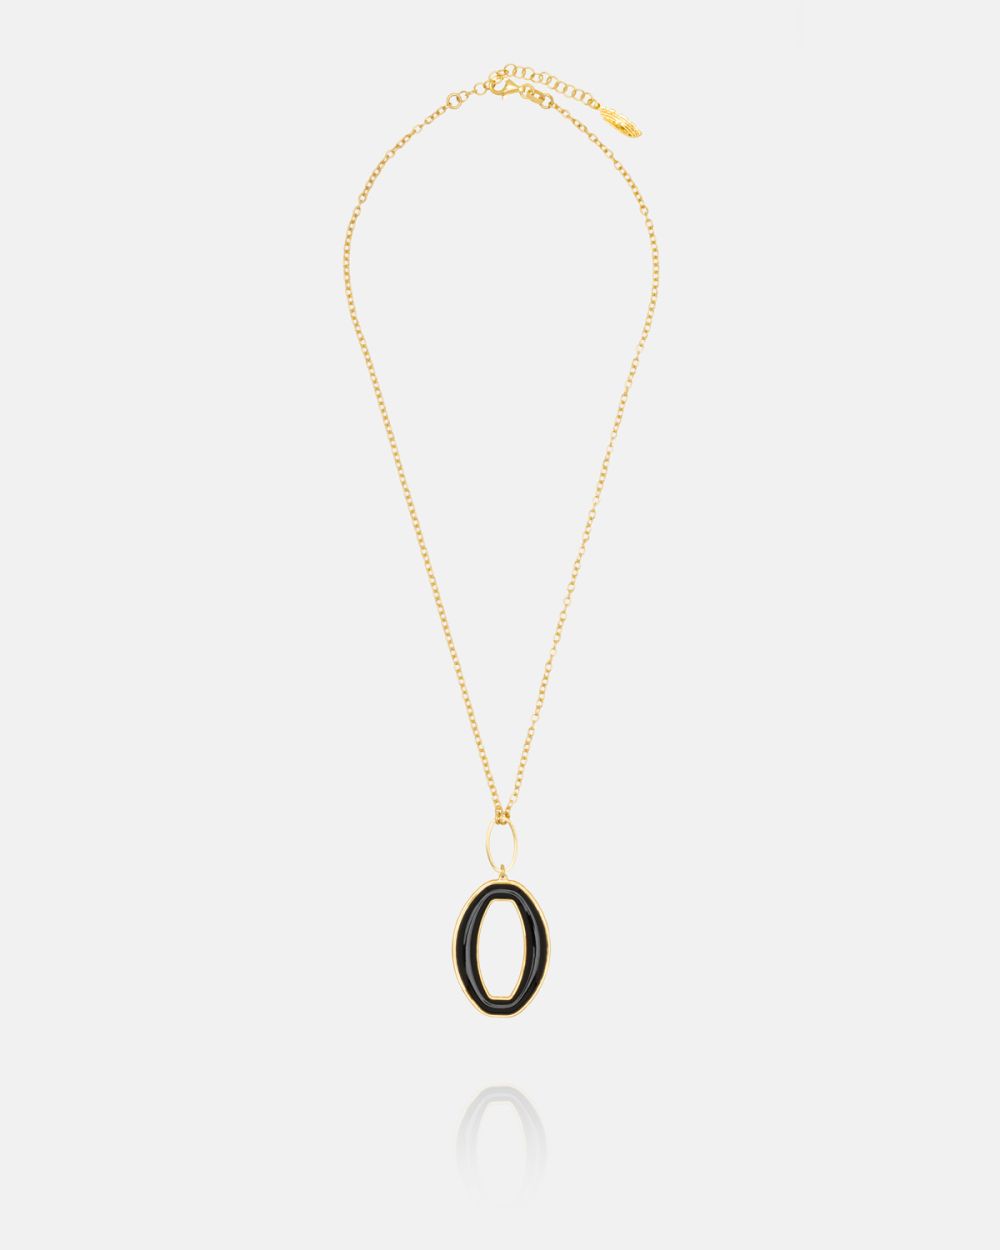 Moonless Necklace in Gold Plated Silver